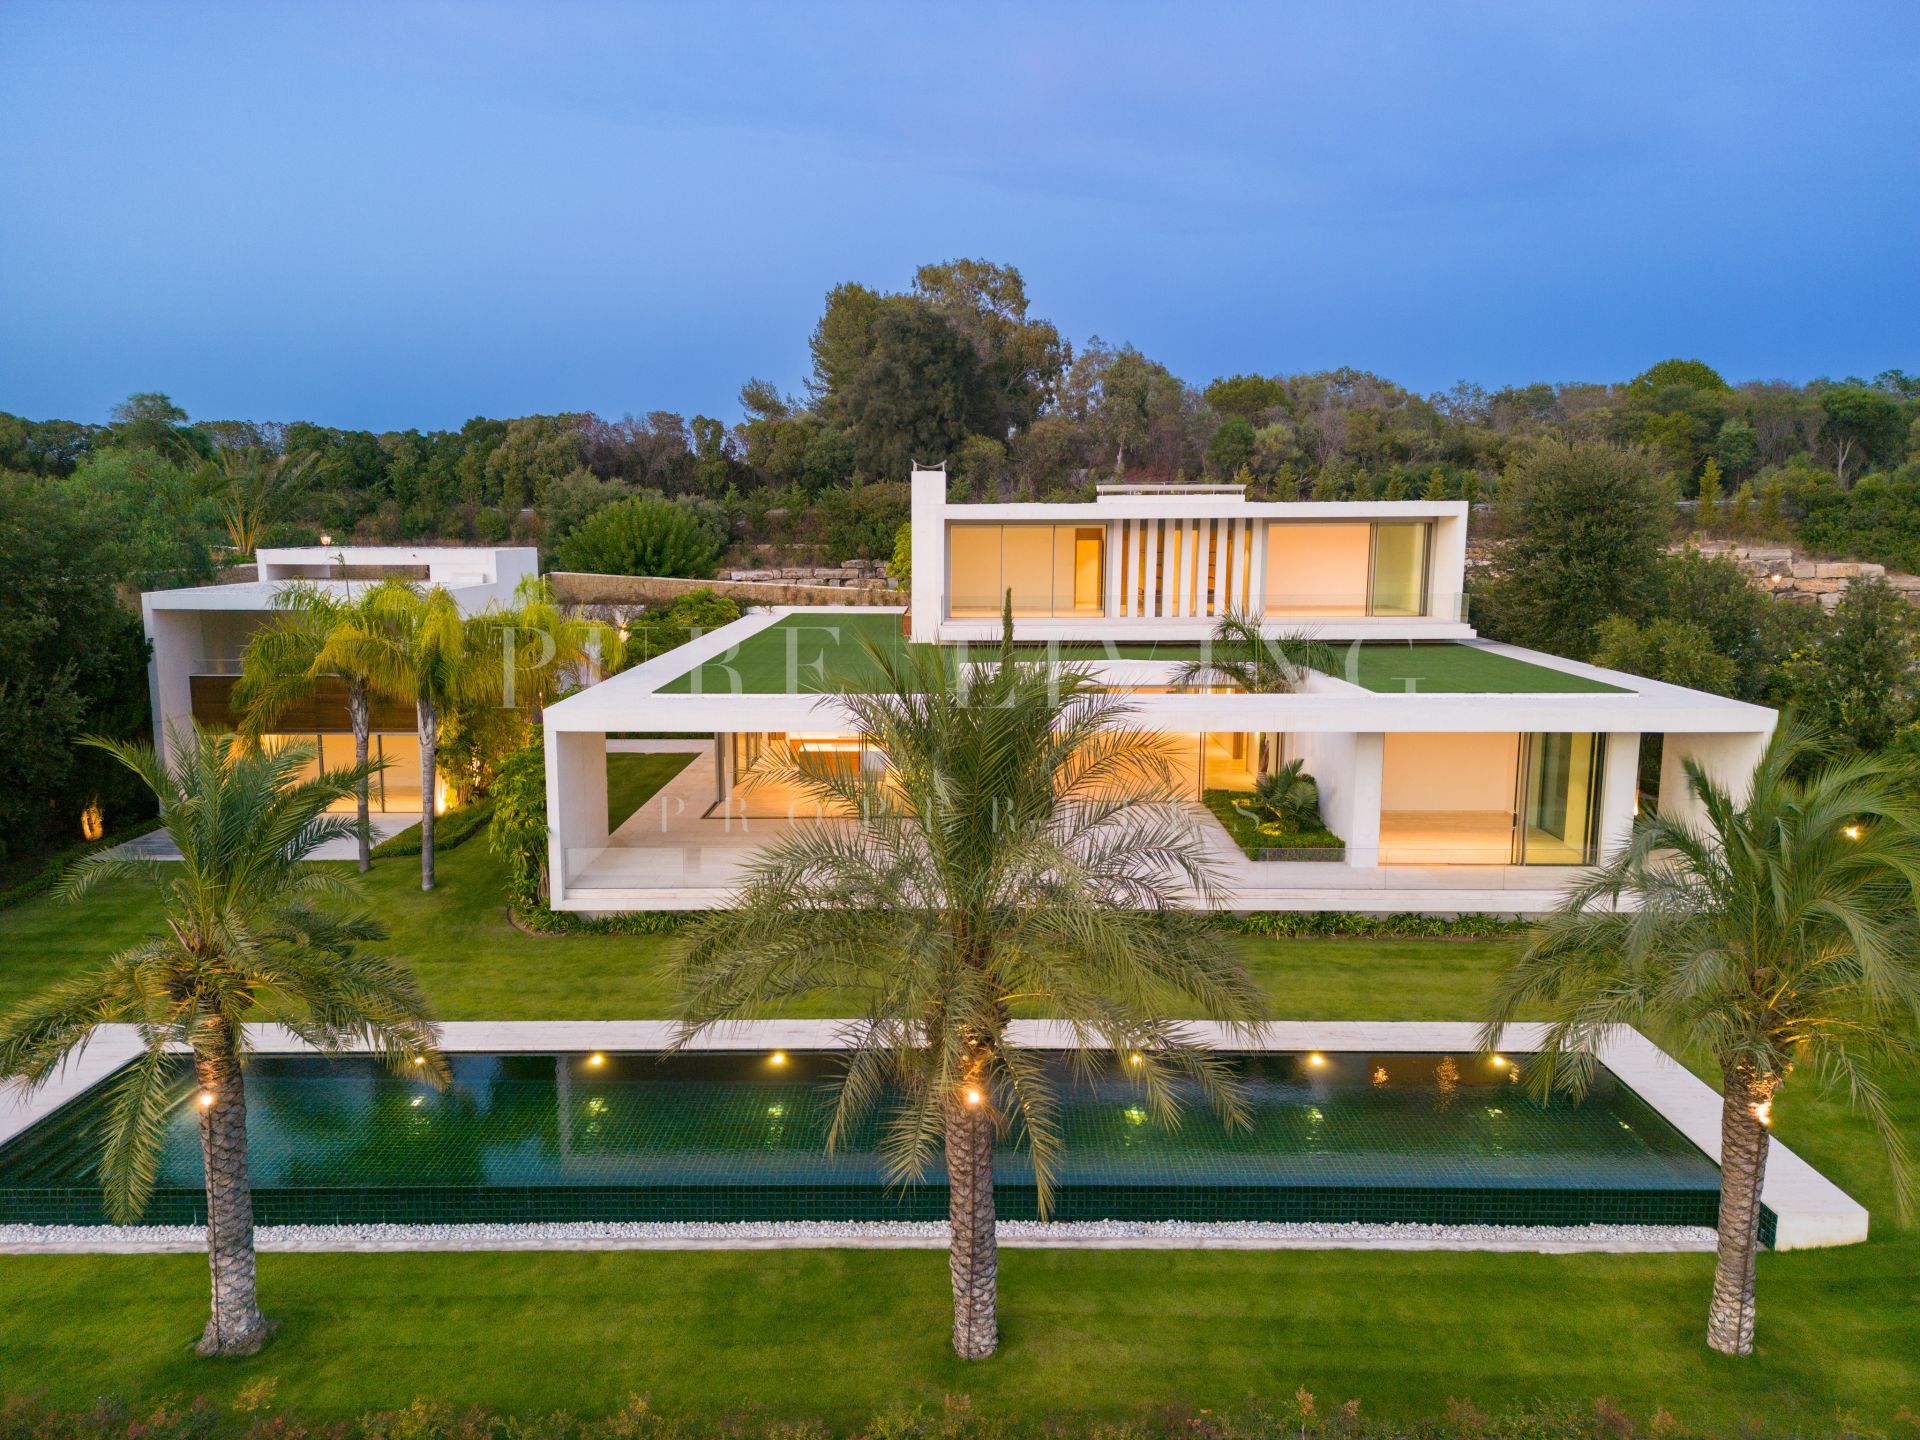 Outstanding contemporary Five bedroom Project villa with unbeatable views over golf course and the Mediterranean coast in Finca Cortesin, Casares.